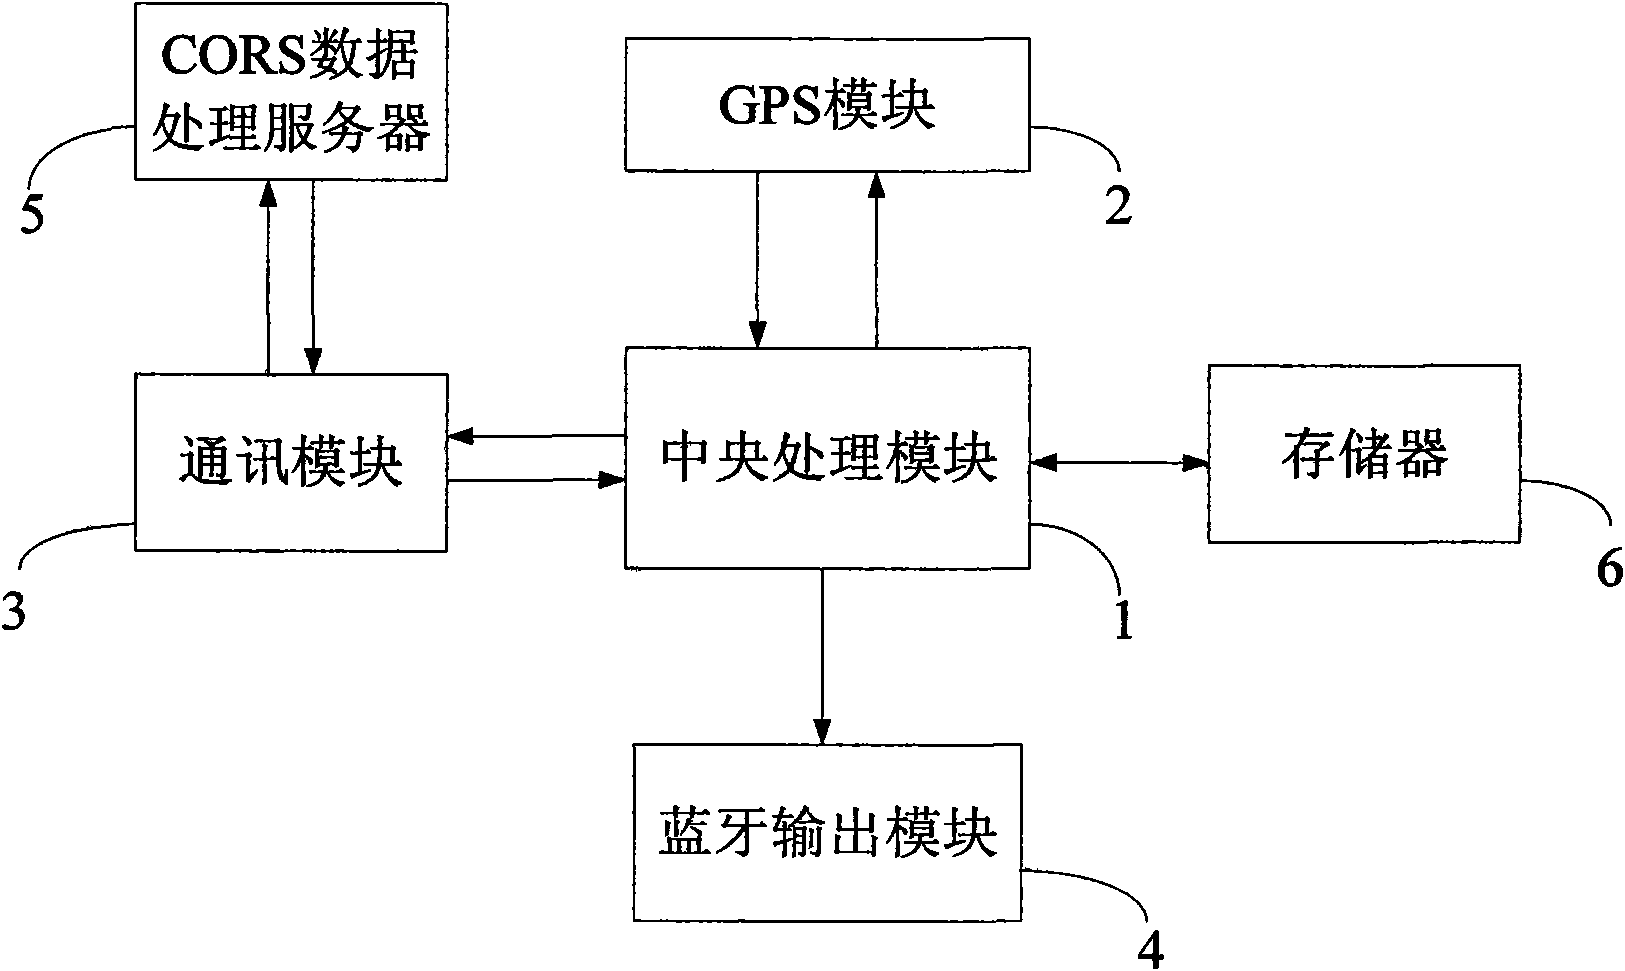 Double-frequency GPS receiver and CORS system